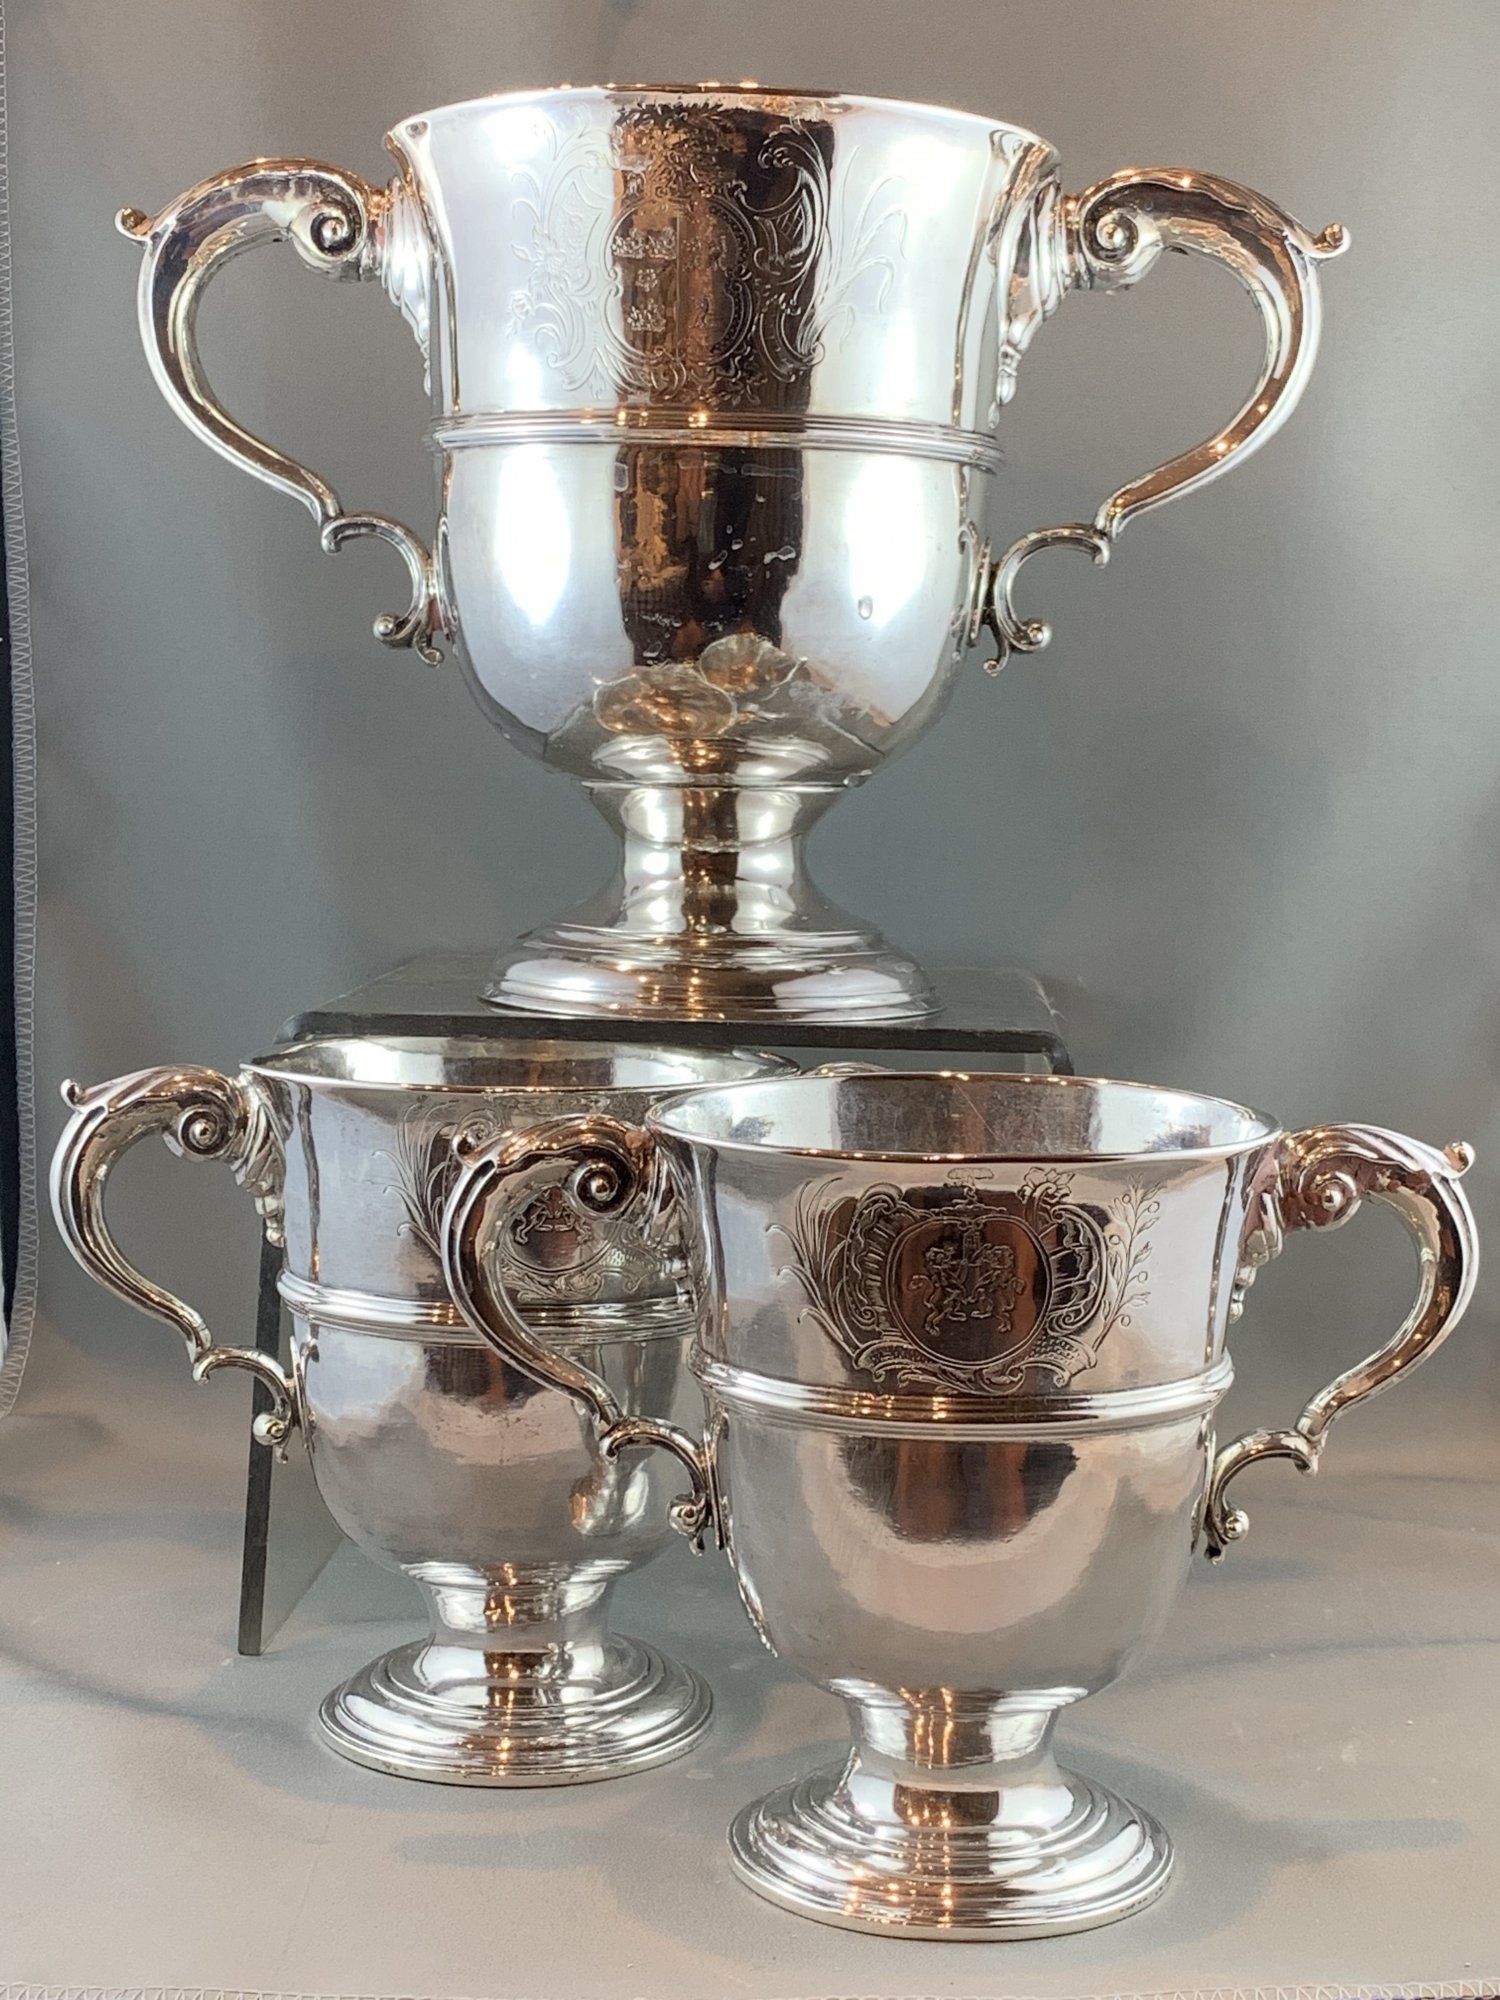 Malcolm Fraser Interest. Ex. Property of the family of Malcolm Fraser.  A suite of three 18th century Irish silver two handle cups. Each with contemporary coat of arms. Dublin, c.1750.  Provenance: Sotheby’s, December 1994, lot 699 and 670.  Price for the collection: $16,000.